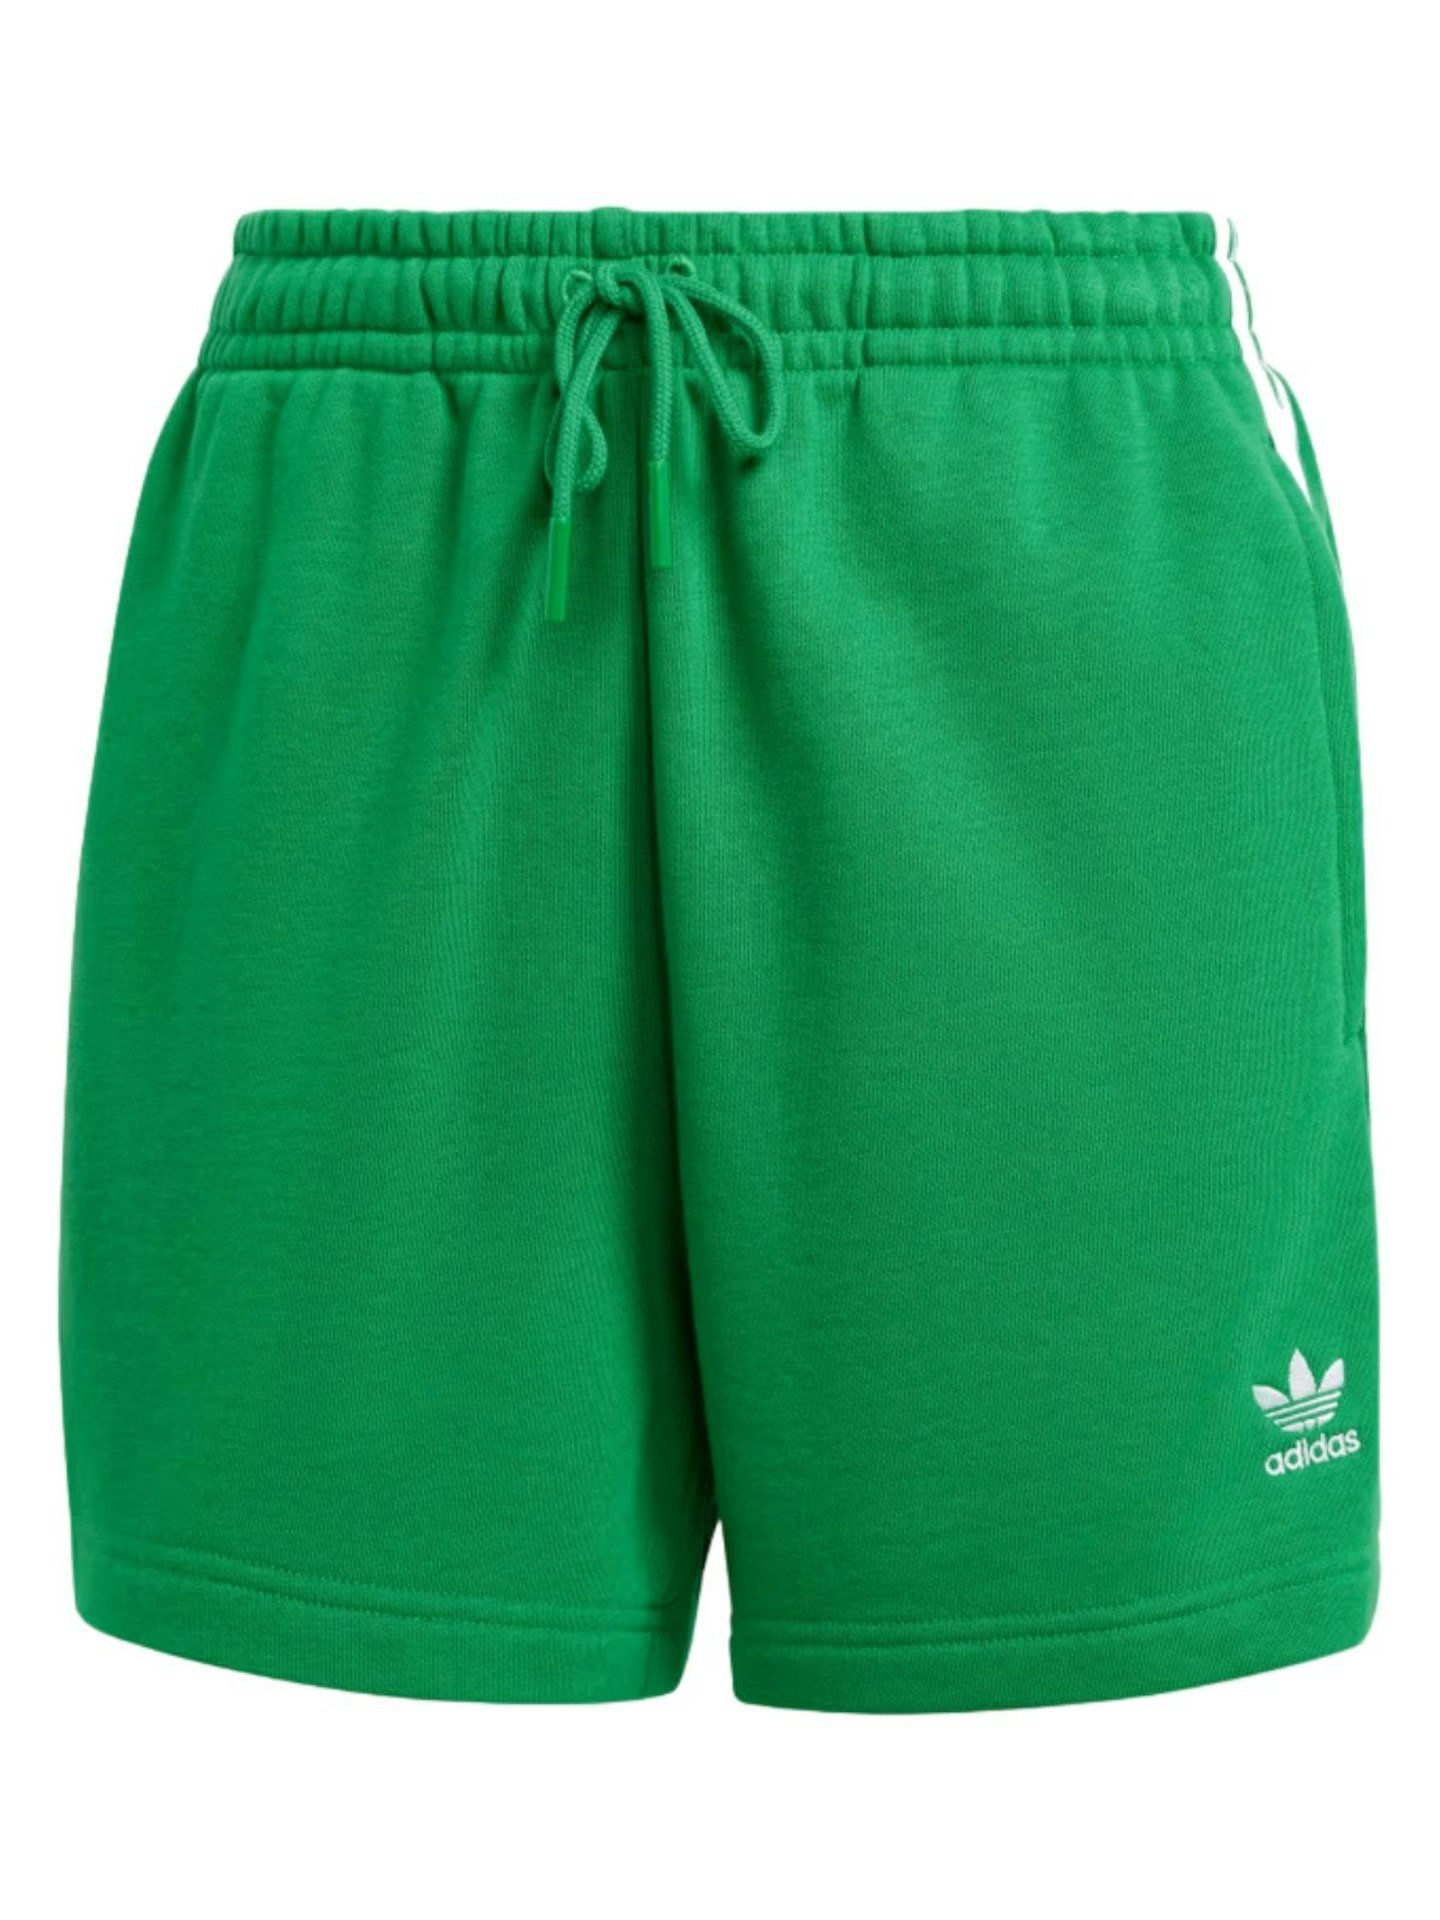 Adidas 3-Stripes French Terry Shorts